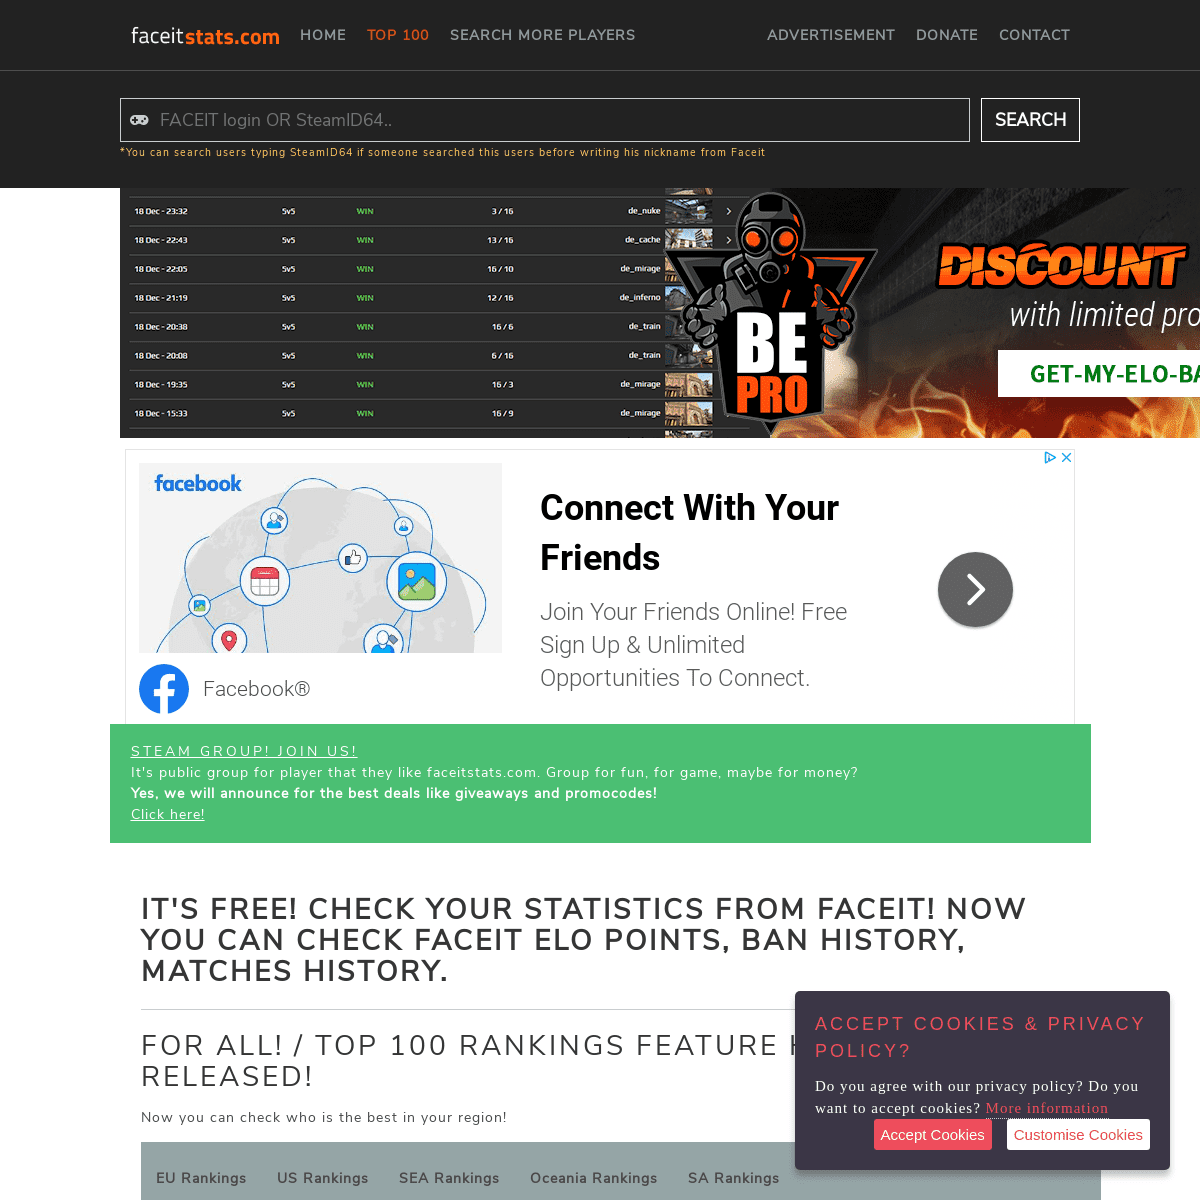 A complete backup of faceitstats.com